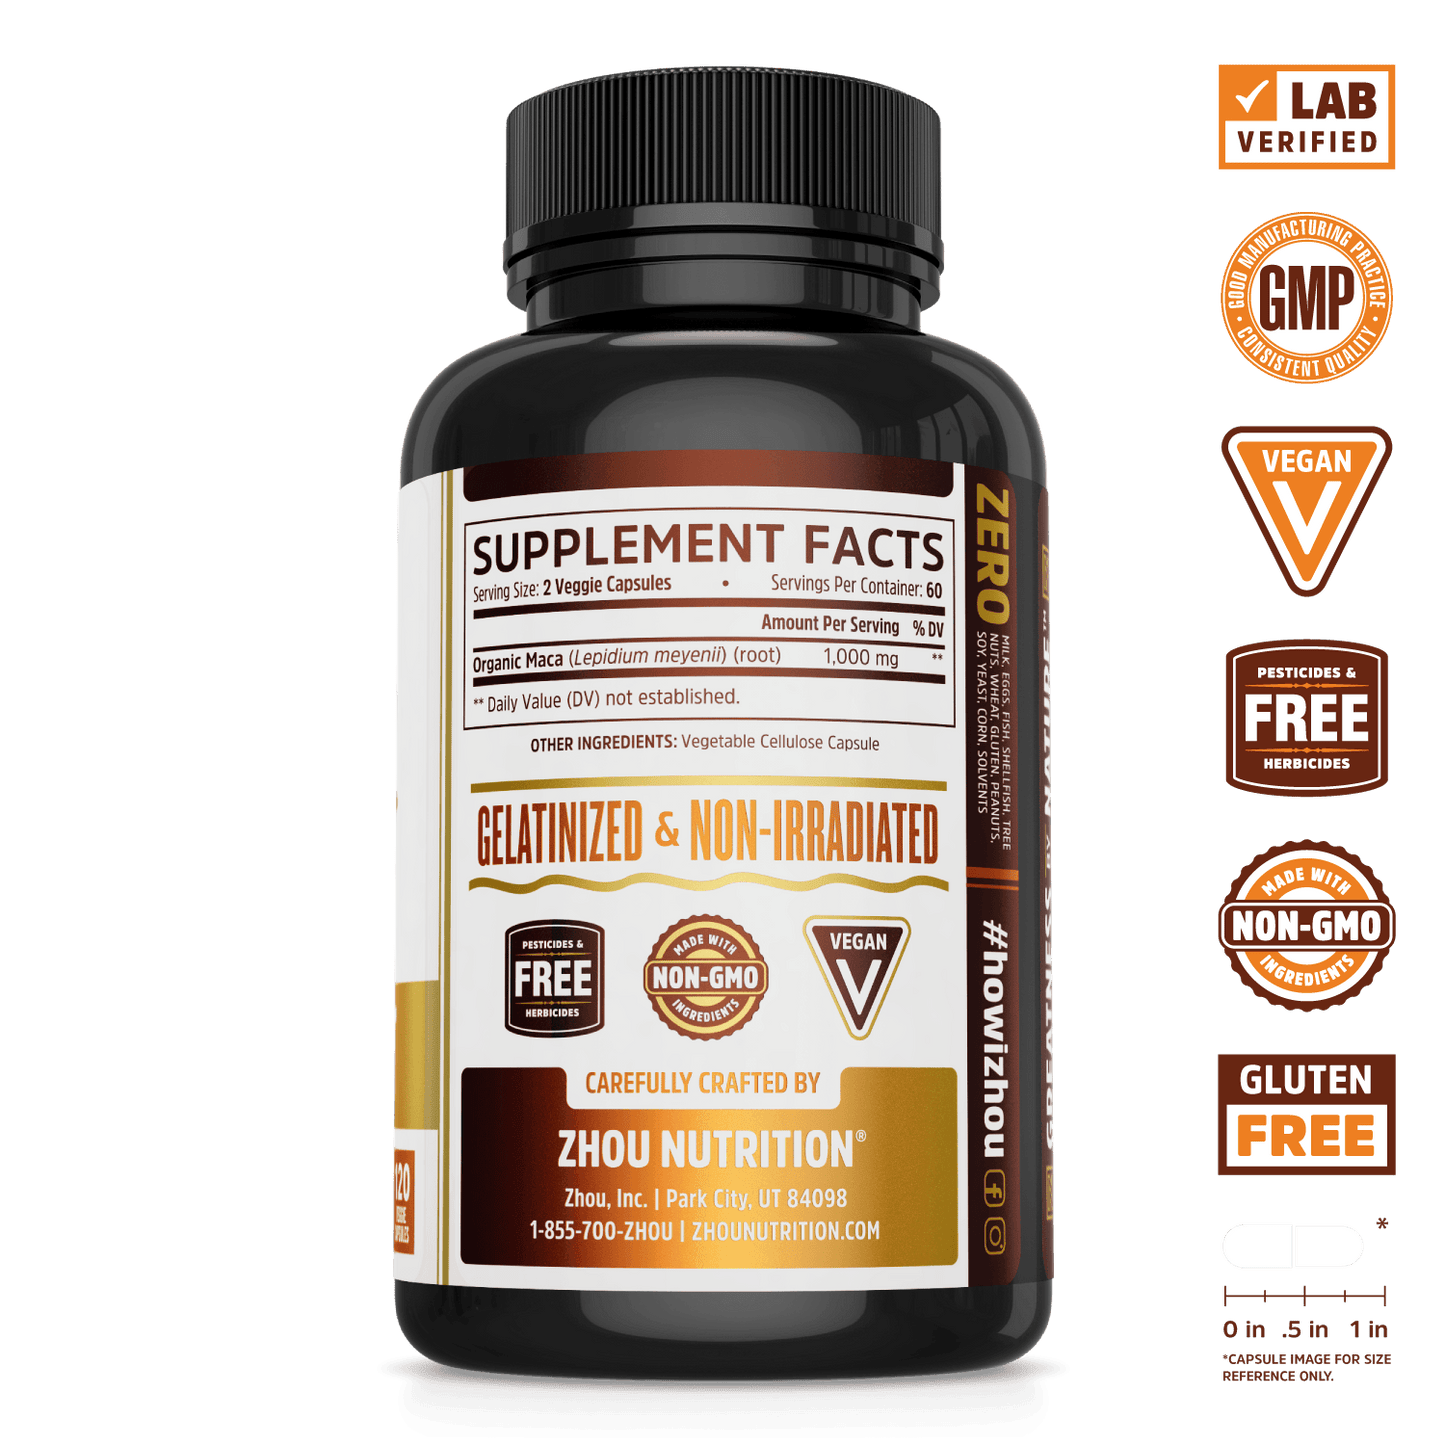 Zhou Nutrition gelatinized non-irradiated Maca Root supplement. Lab verified, good manufacturing practices, vegan, organic maca, made with non-GMO ingredients, gluten free